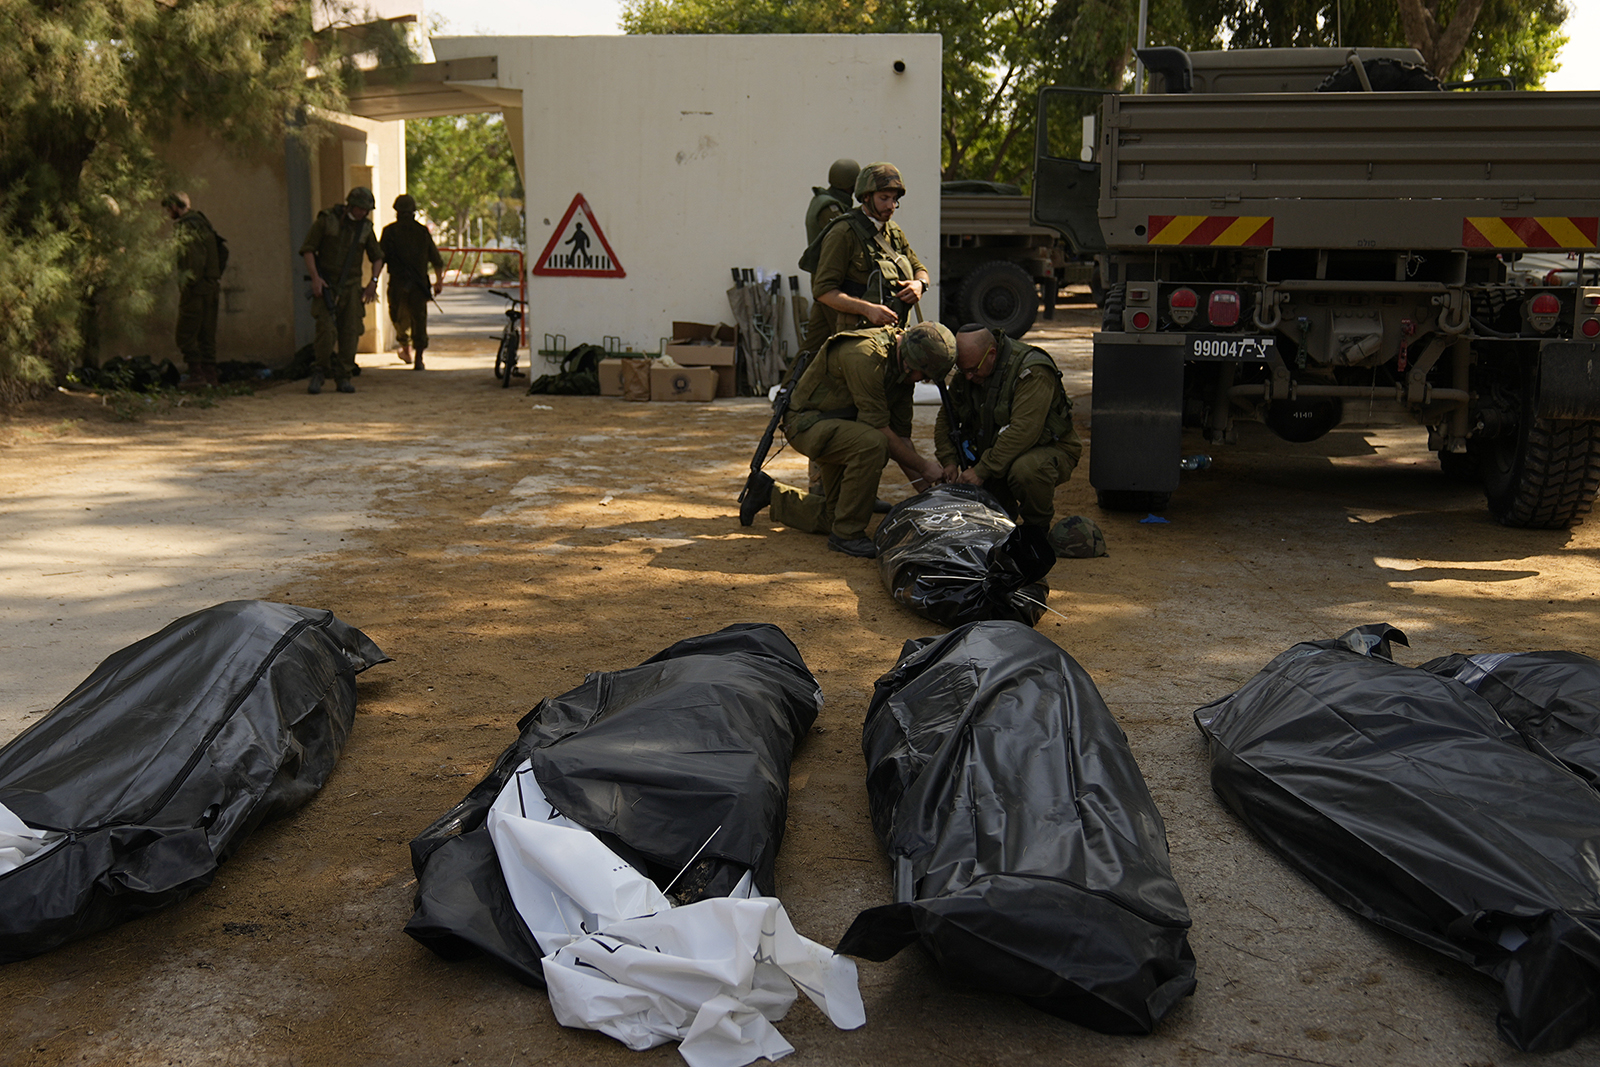 Israeli soldiers stand next to the bodies of Israelis killed by Hamas militants in kibbutz Kfar Azza on Tuesday, Oct. 10, 2023. Hamas militants overran Kfar Azza on Saturday, where many Israelis were killed and taken captive. (AP Photo/Ohad Zwigenberg)